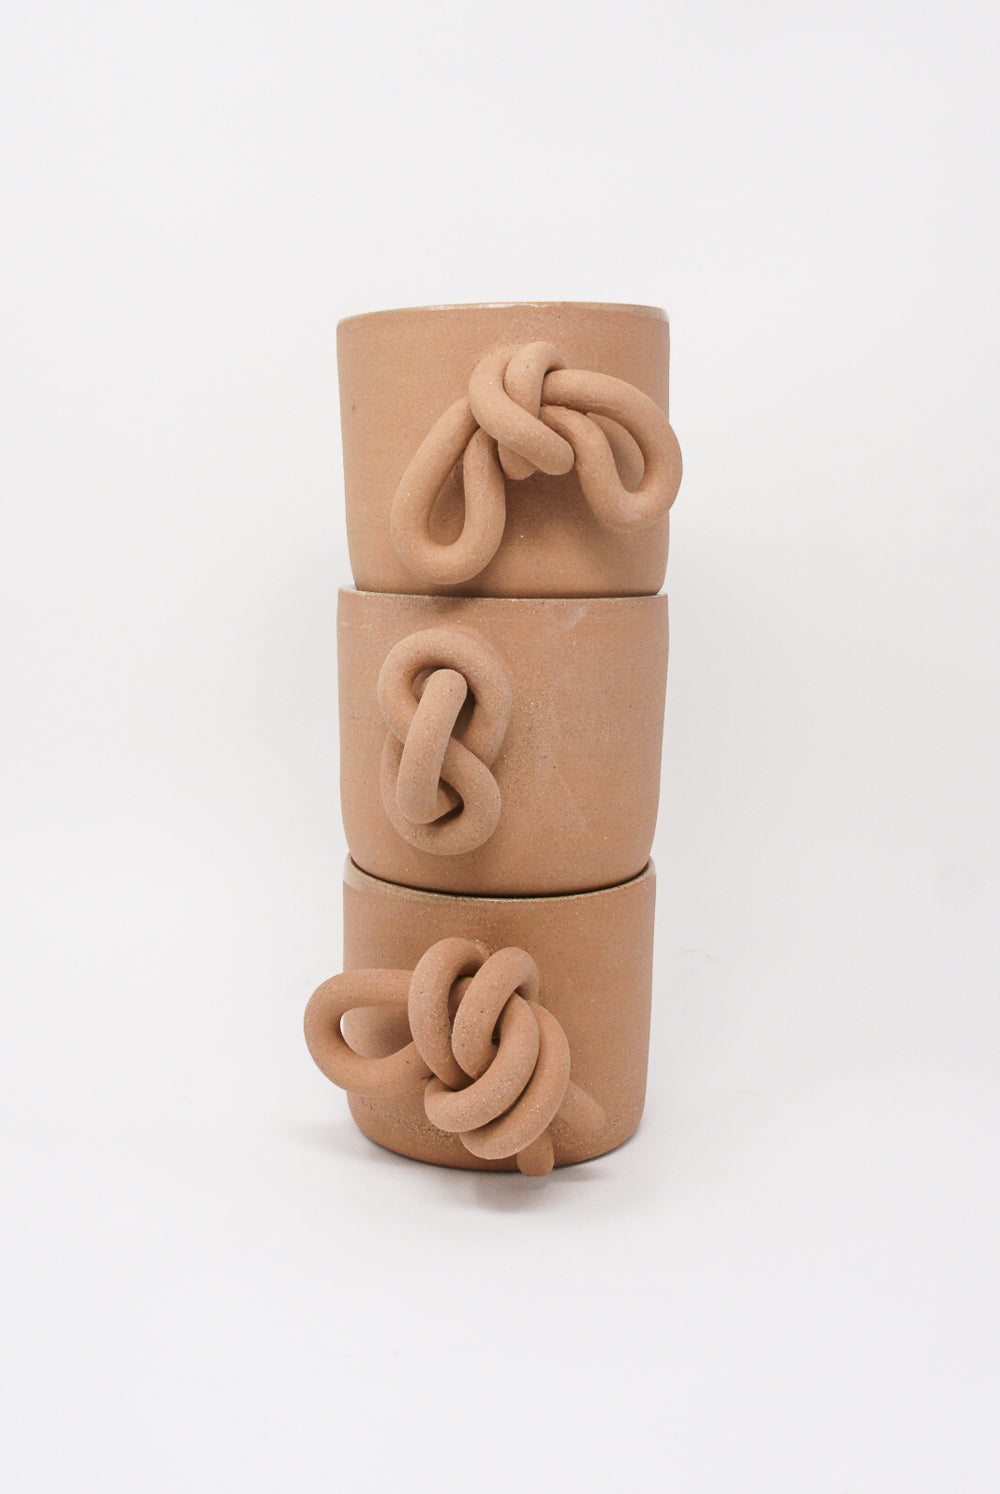 Lost Quarry - Overhand Knot Mug in Terracotta group stacked view